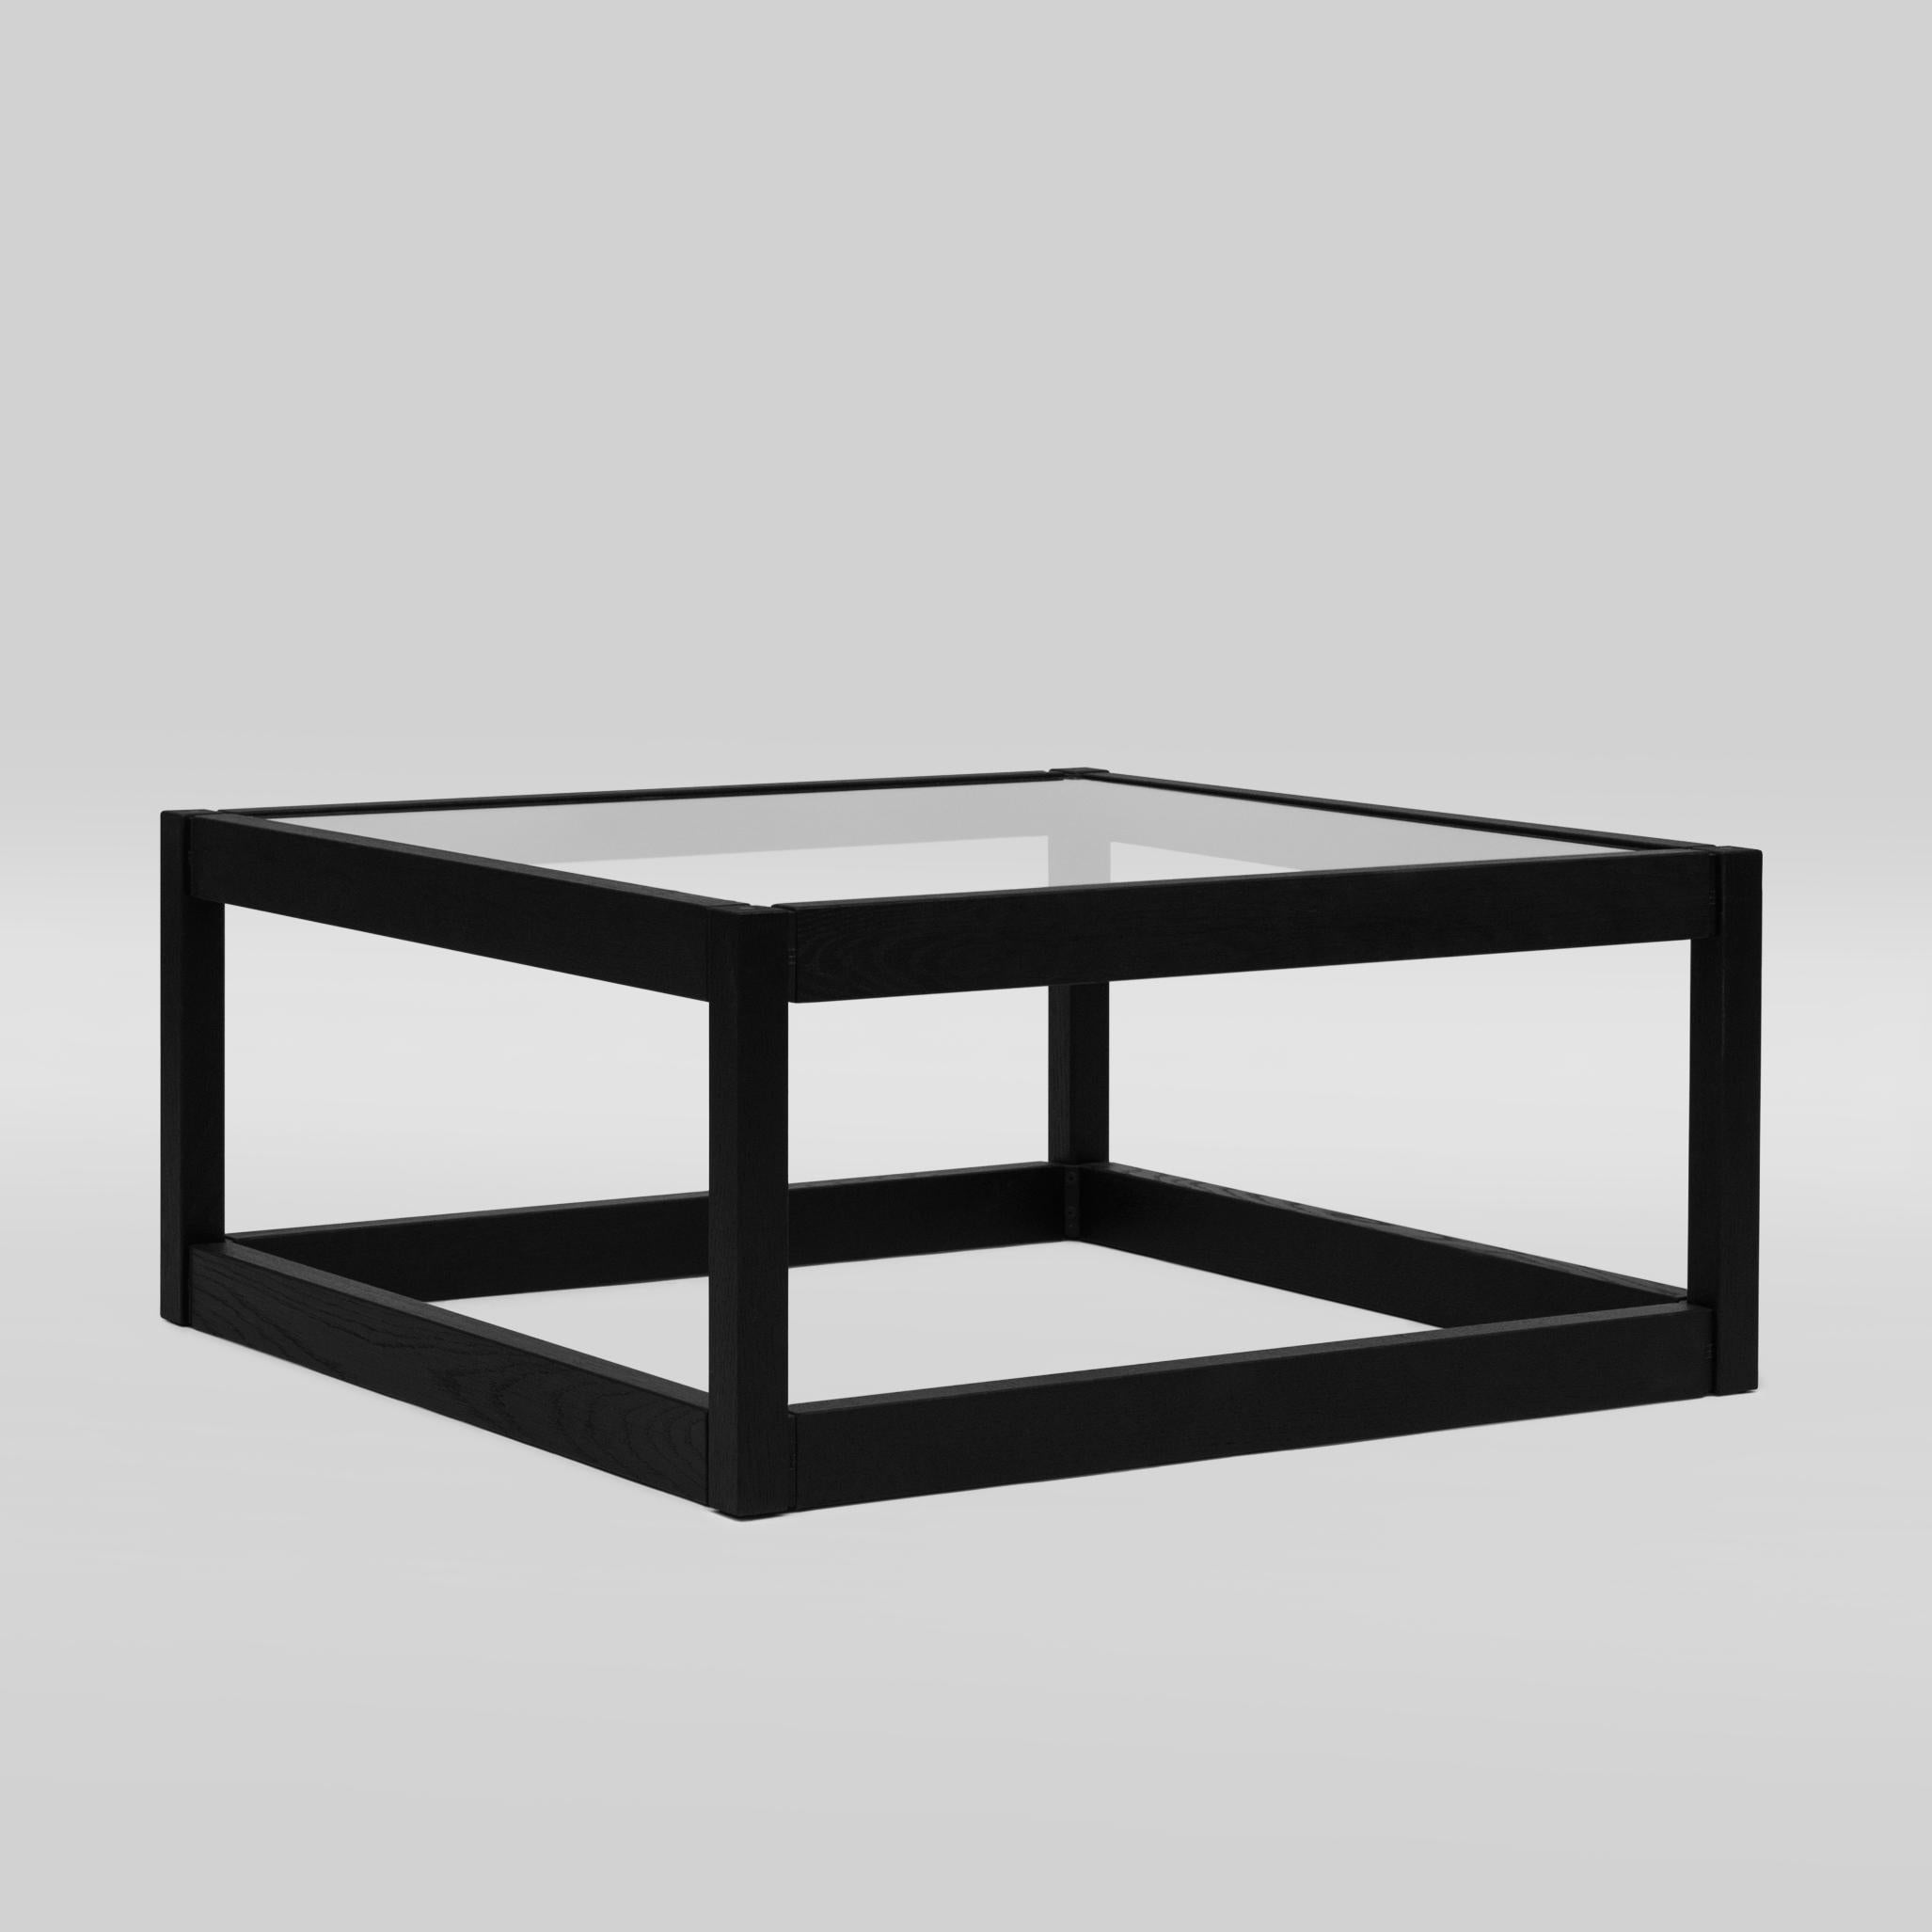 Contemporary coffee table designed by Peter Ghyczy.
Manufactured by Ghyczy (Netherlands)

This furniture tells an intriguing dialogue between history and modernity. The joints are an evolution of a design by Peter Ghyczy from begin of the 1970s.